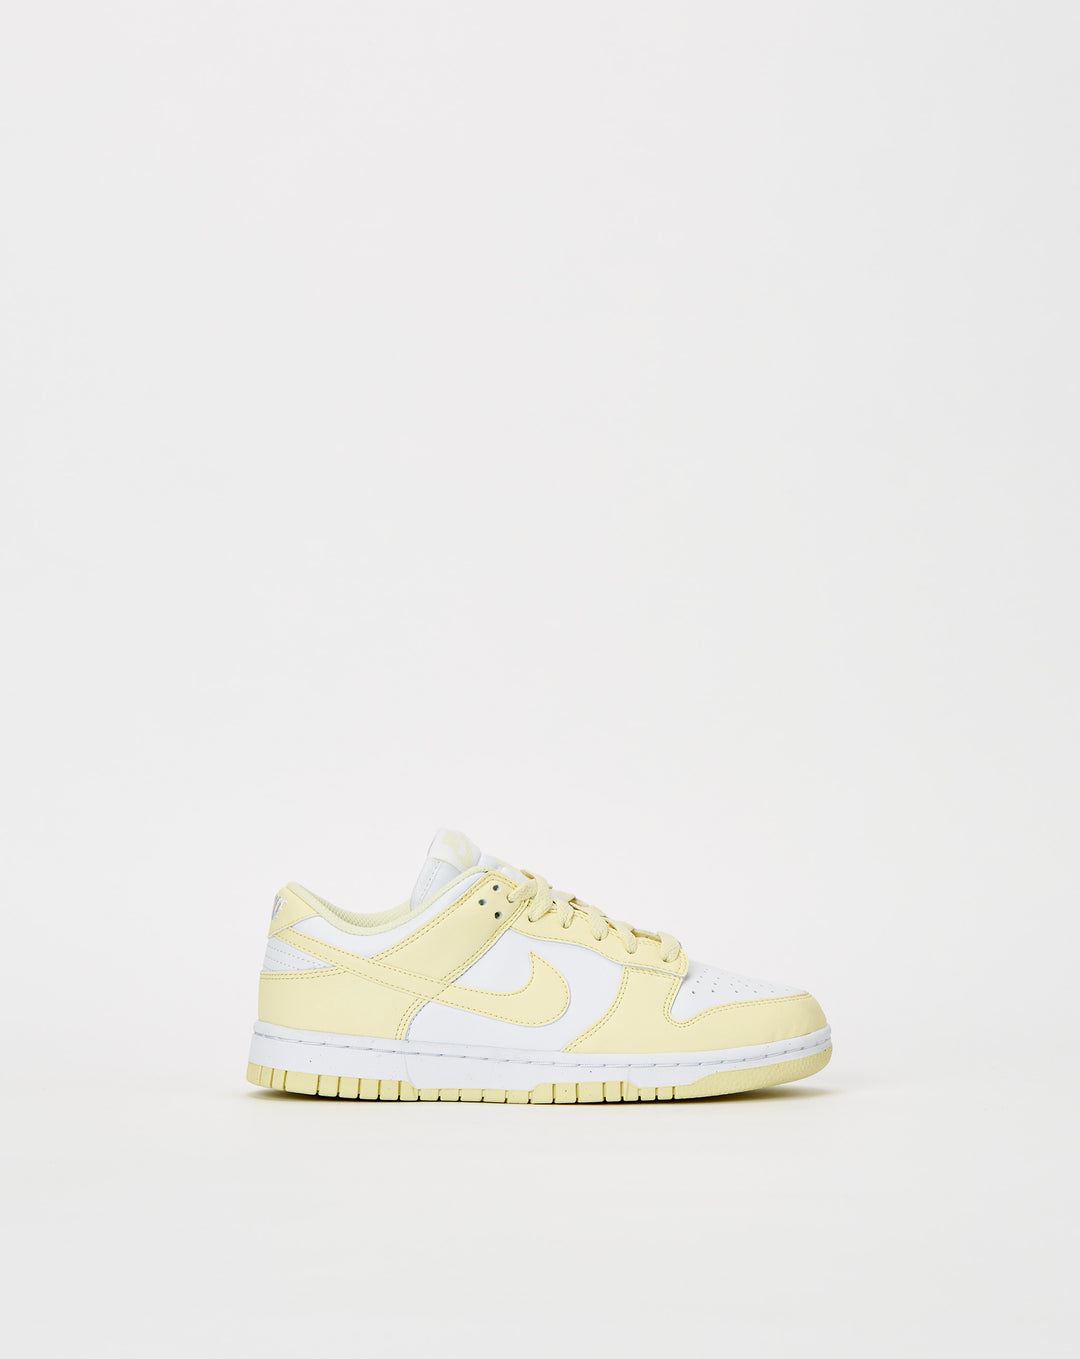 Nike new nike wmns waffle racer crater aluminum summit white 2021 for sale  - Cheap Urlfreeze Jordan outlet